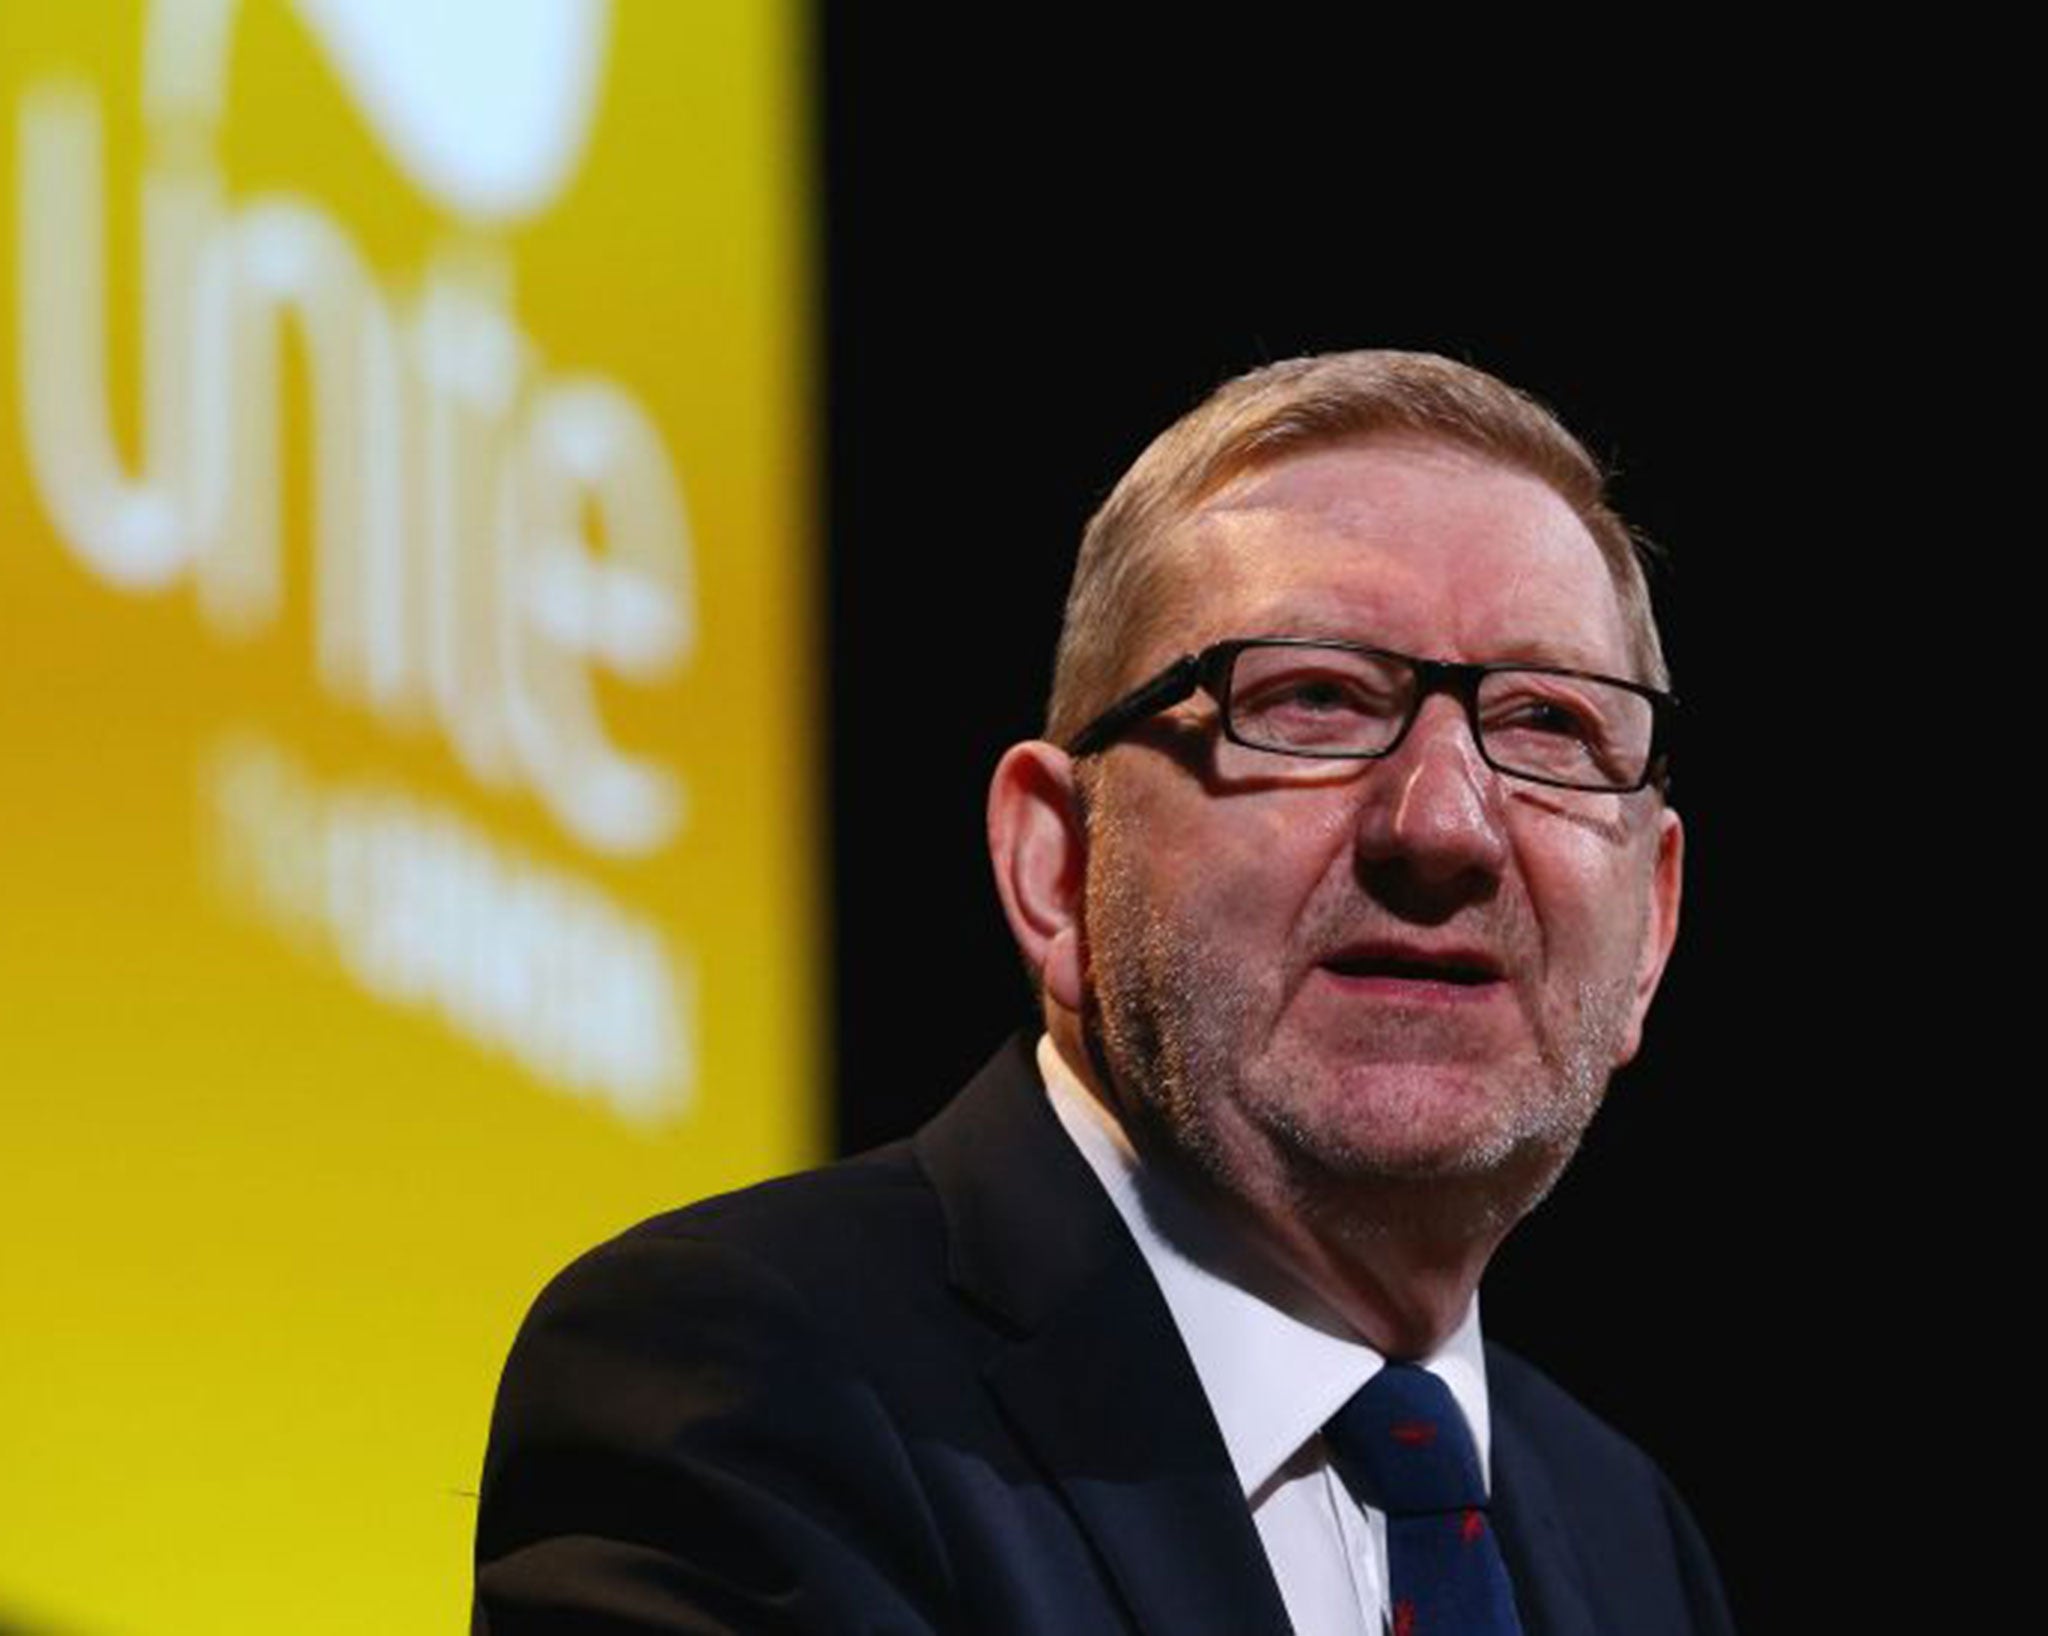 Mr McCluskey says his support for Jeremy Corbyn remains 'rock solid'